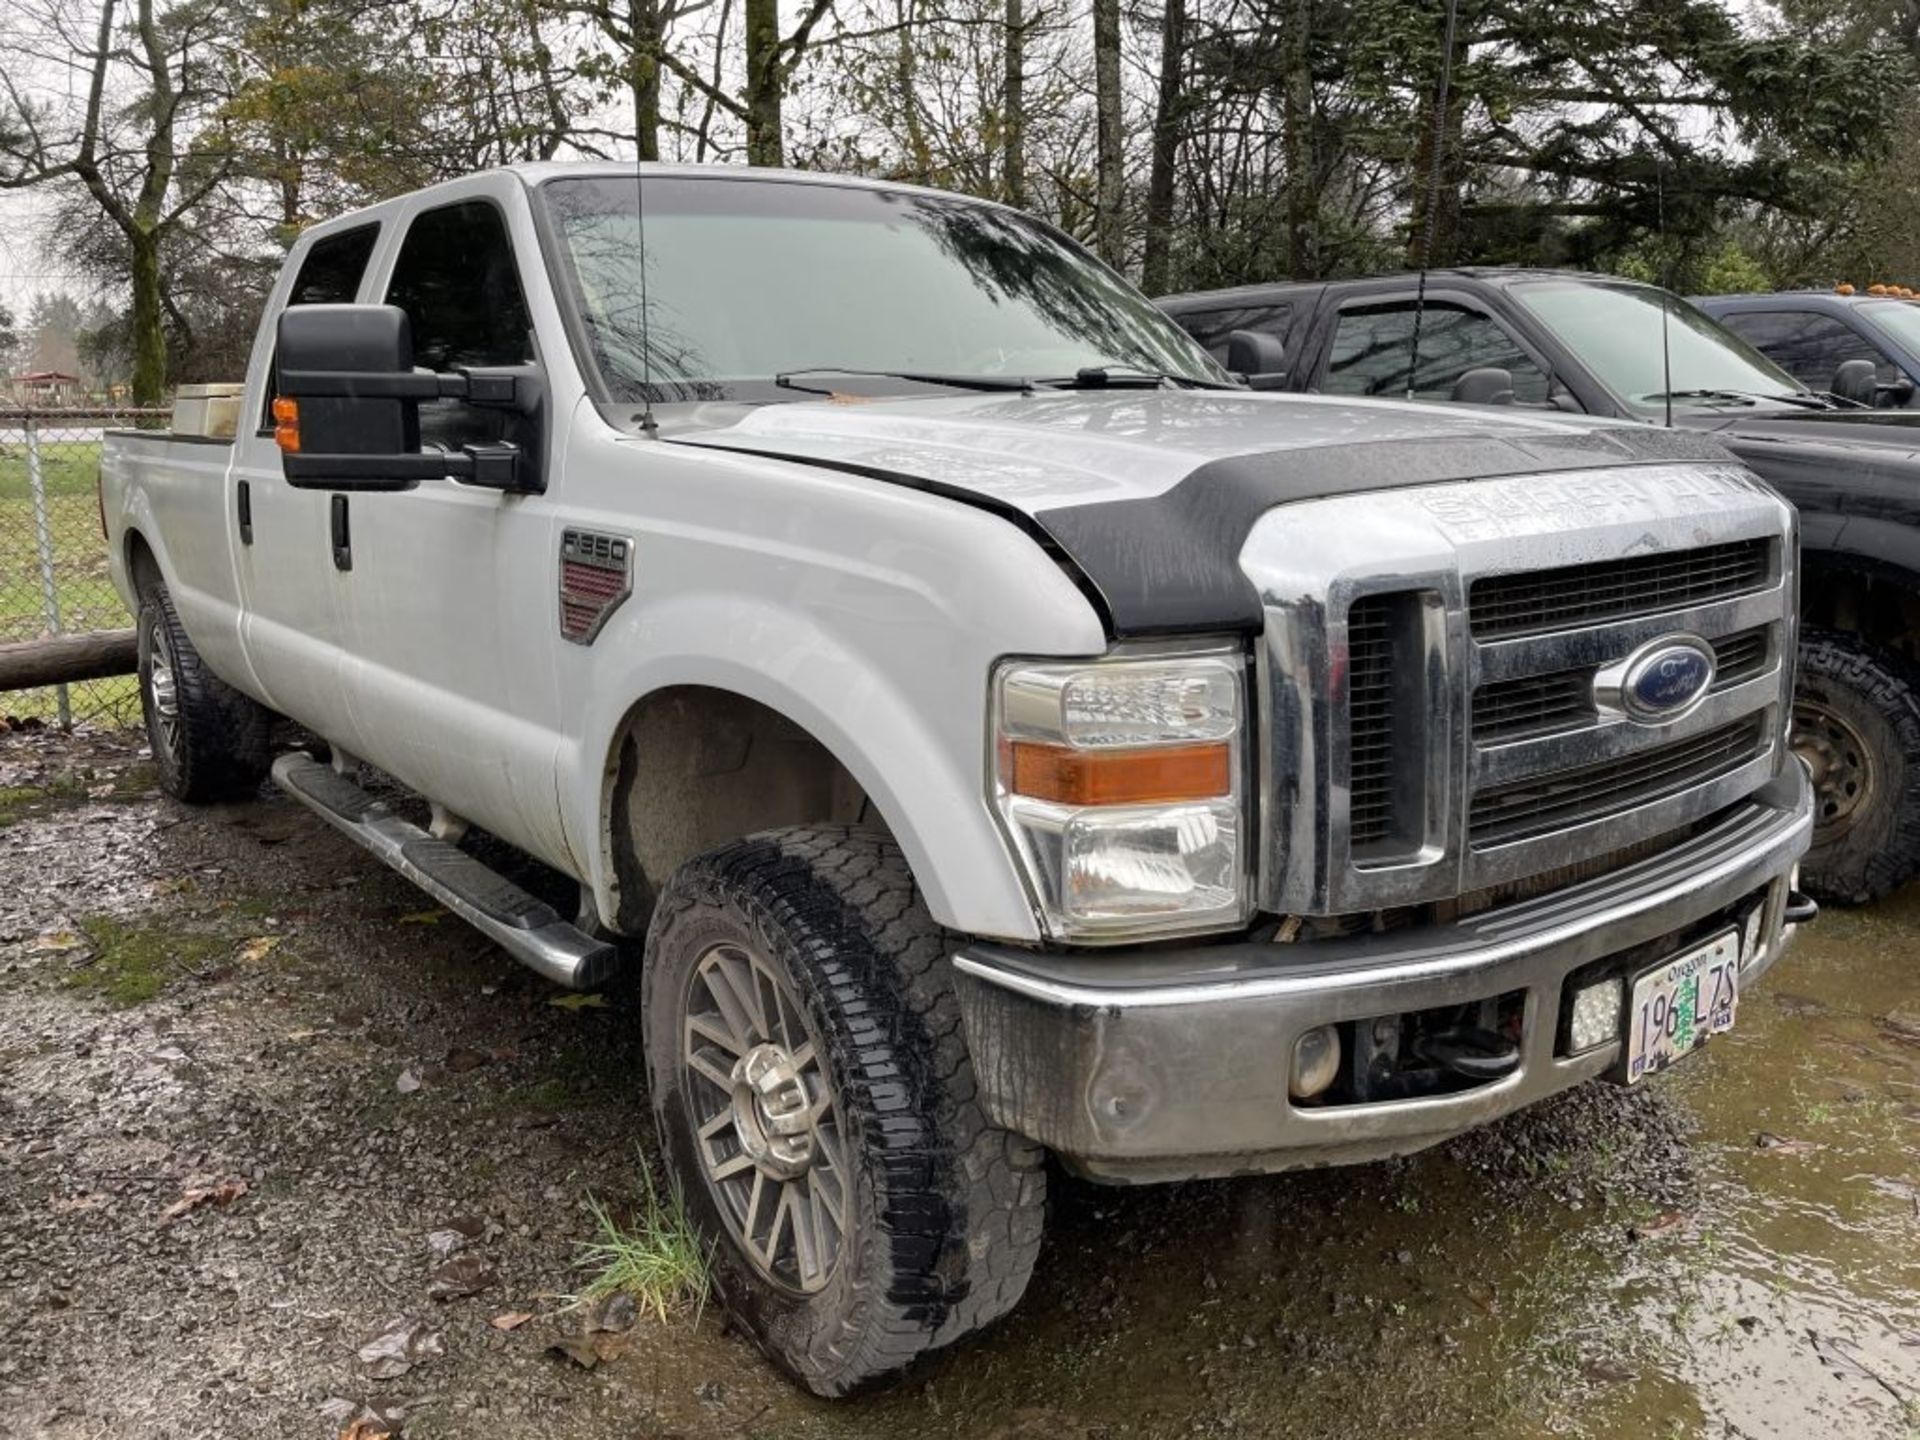 2008 Ford F350 XLT SD 4x4 Crew Cab Pickup - Image 2 of 16